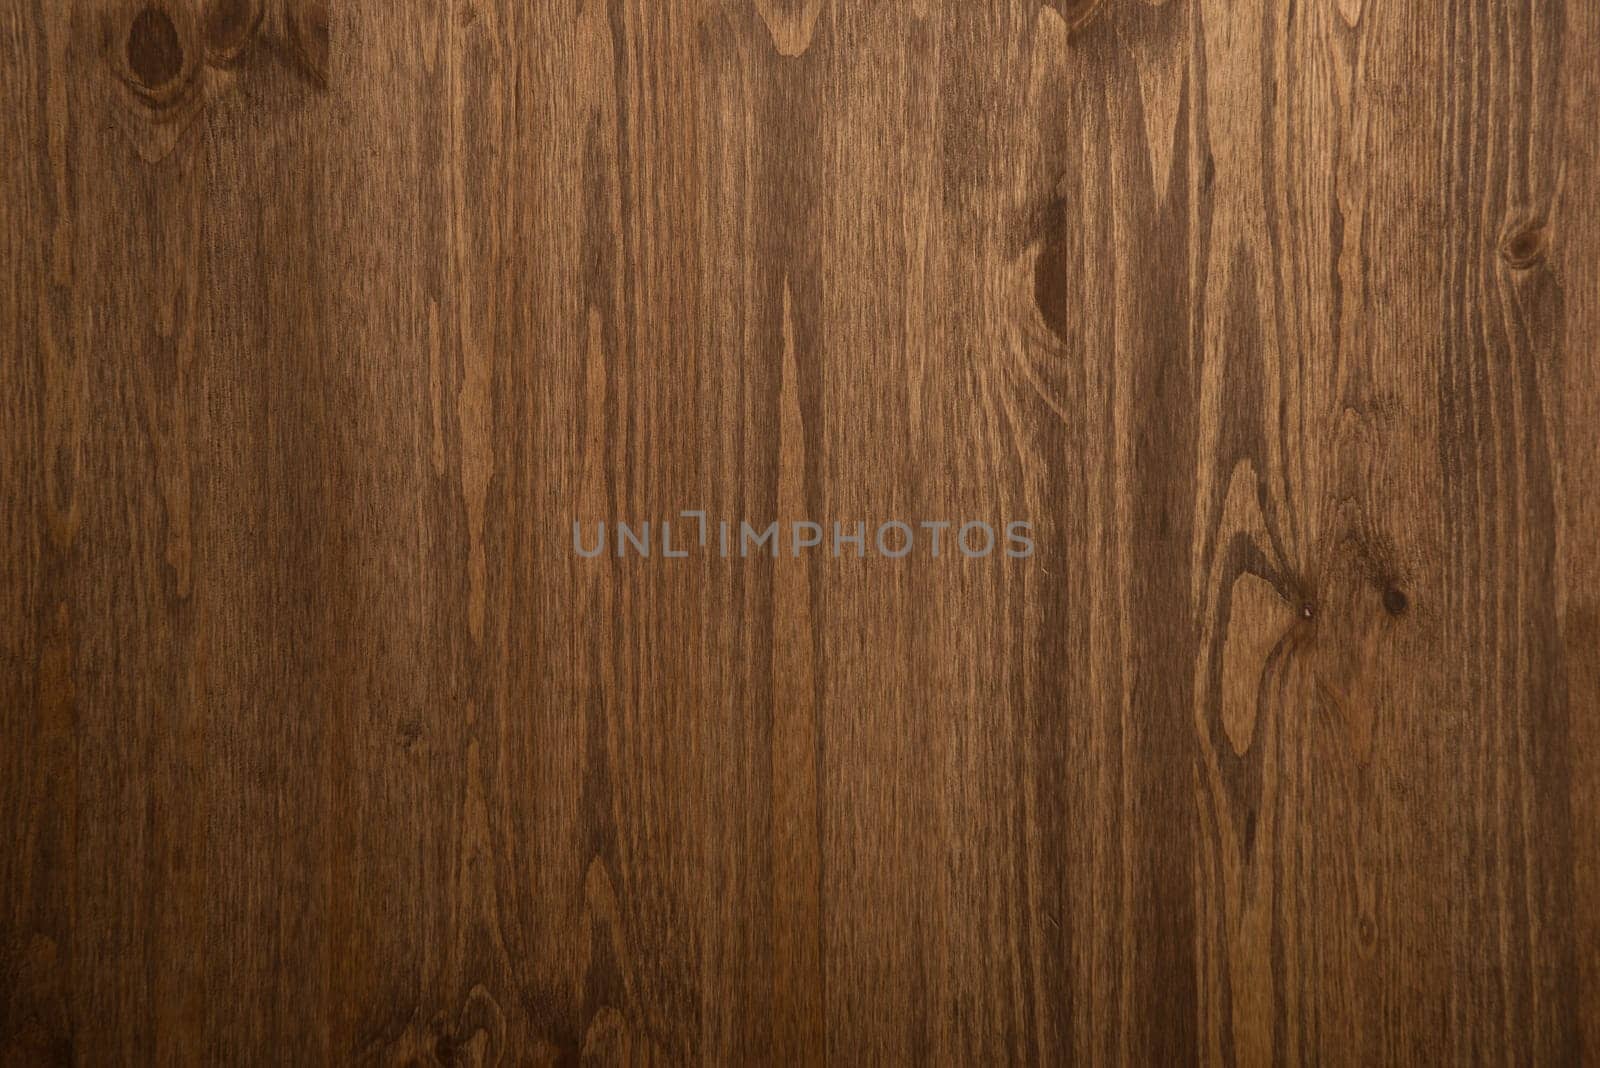 Dark Brown wood plank wall texture background - image